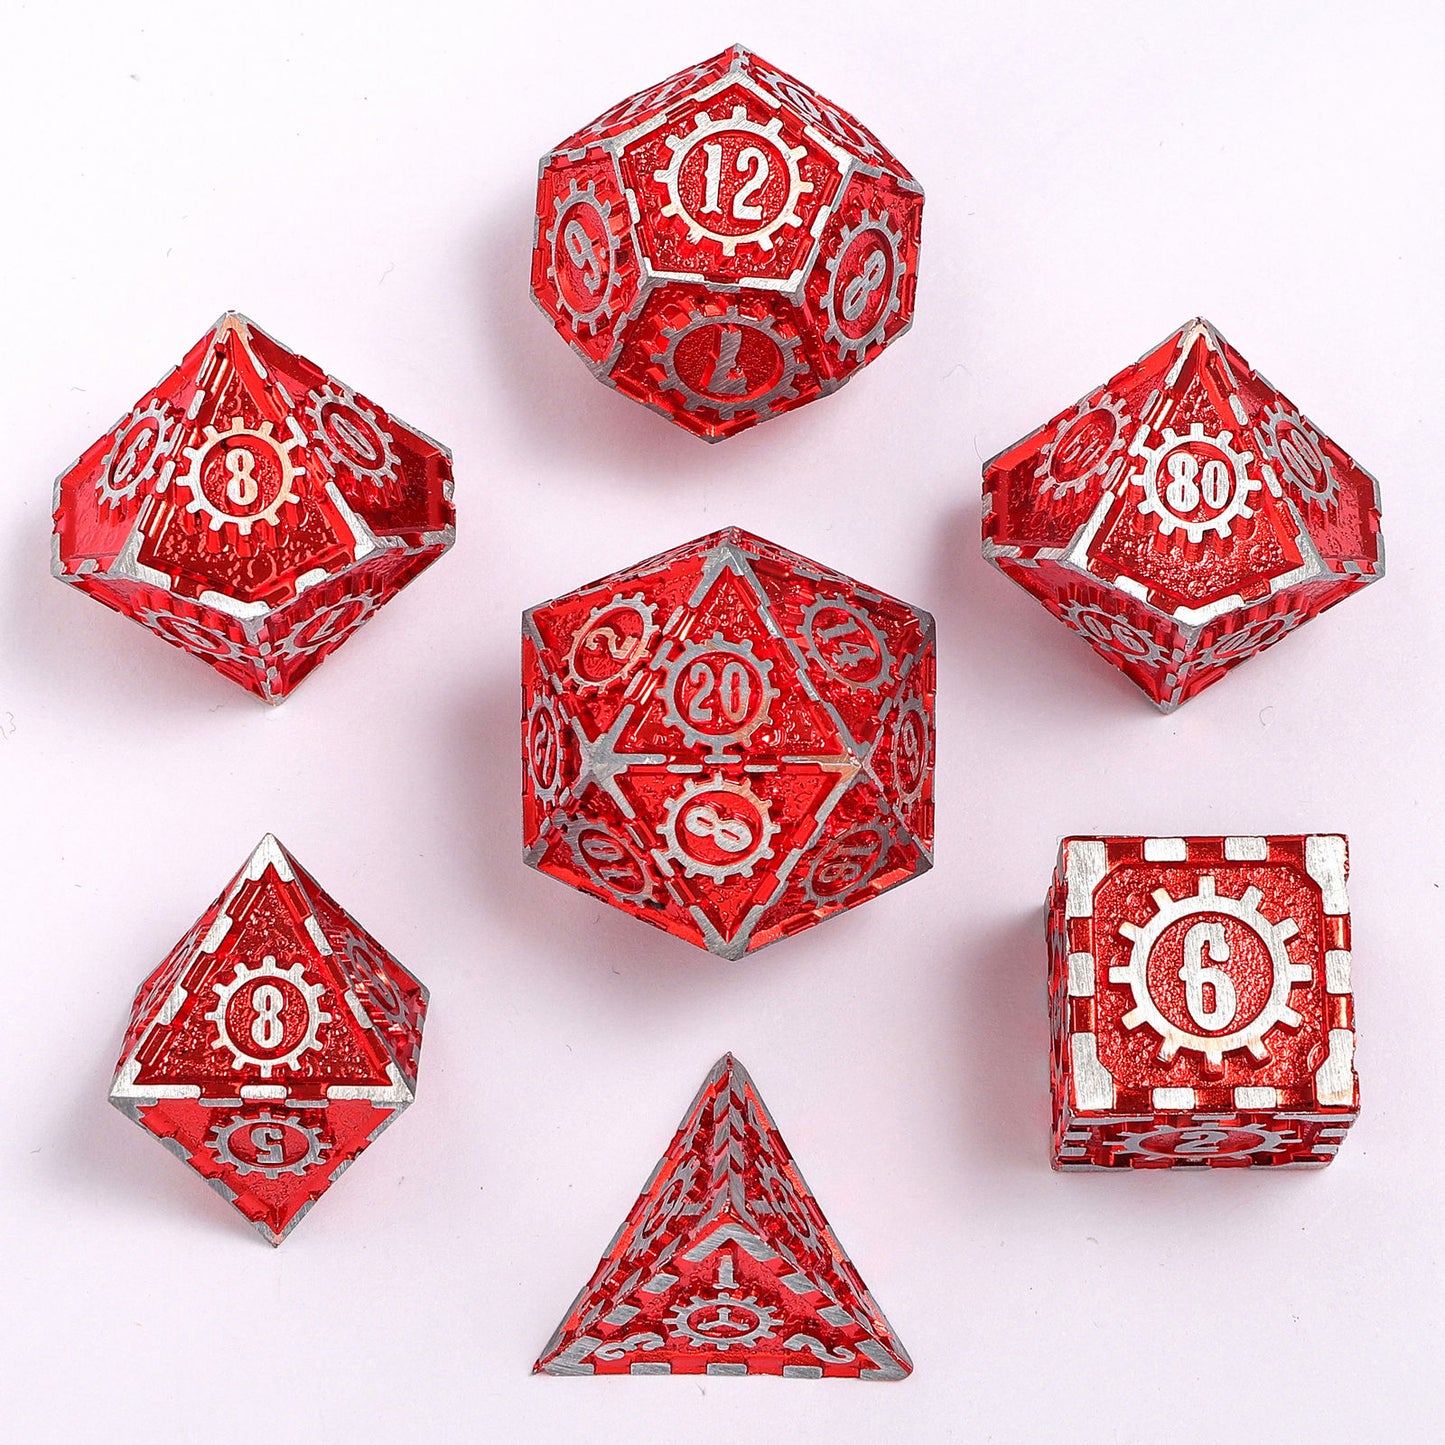 Gears of Fate Solid Metal Dice Set-Brushed Red